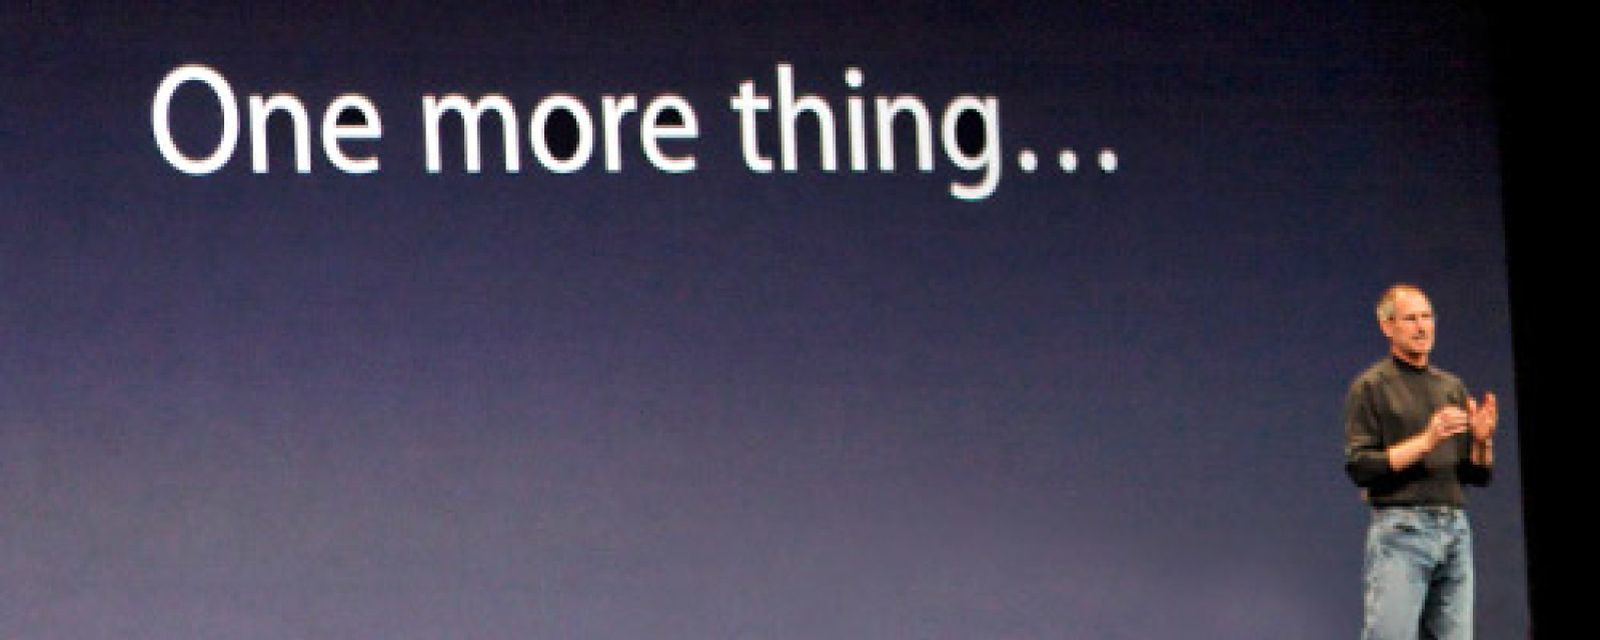 Foto: Steve Jobs: "One more thing..."